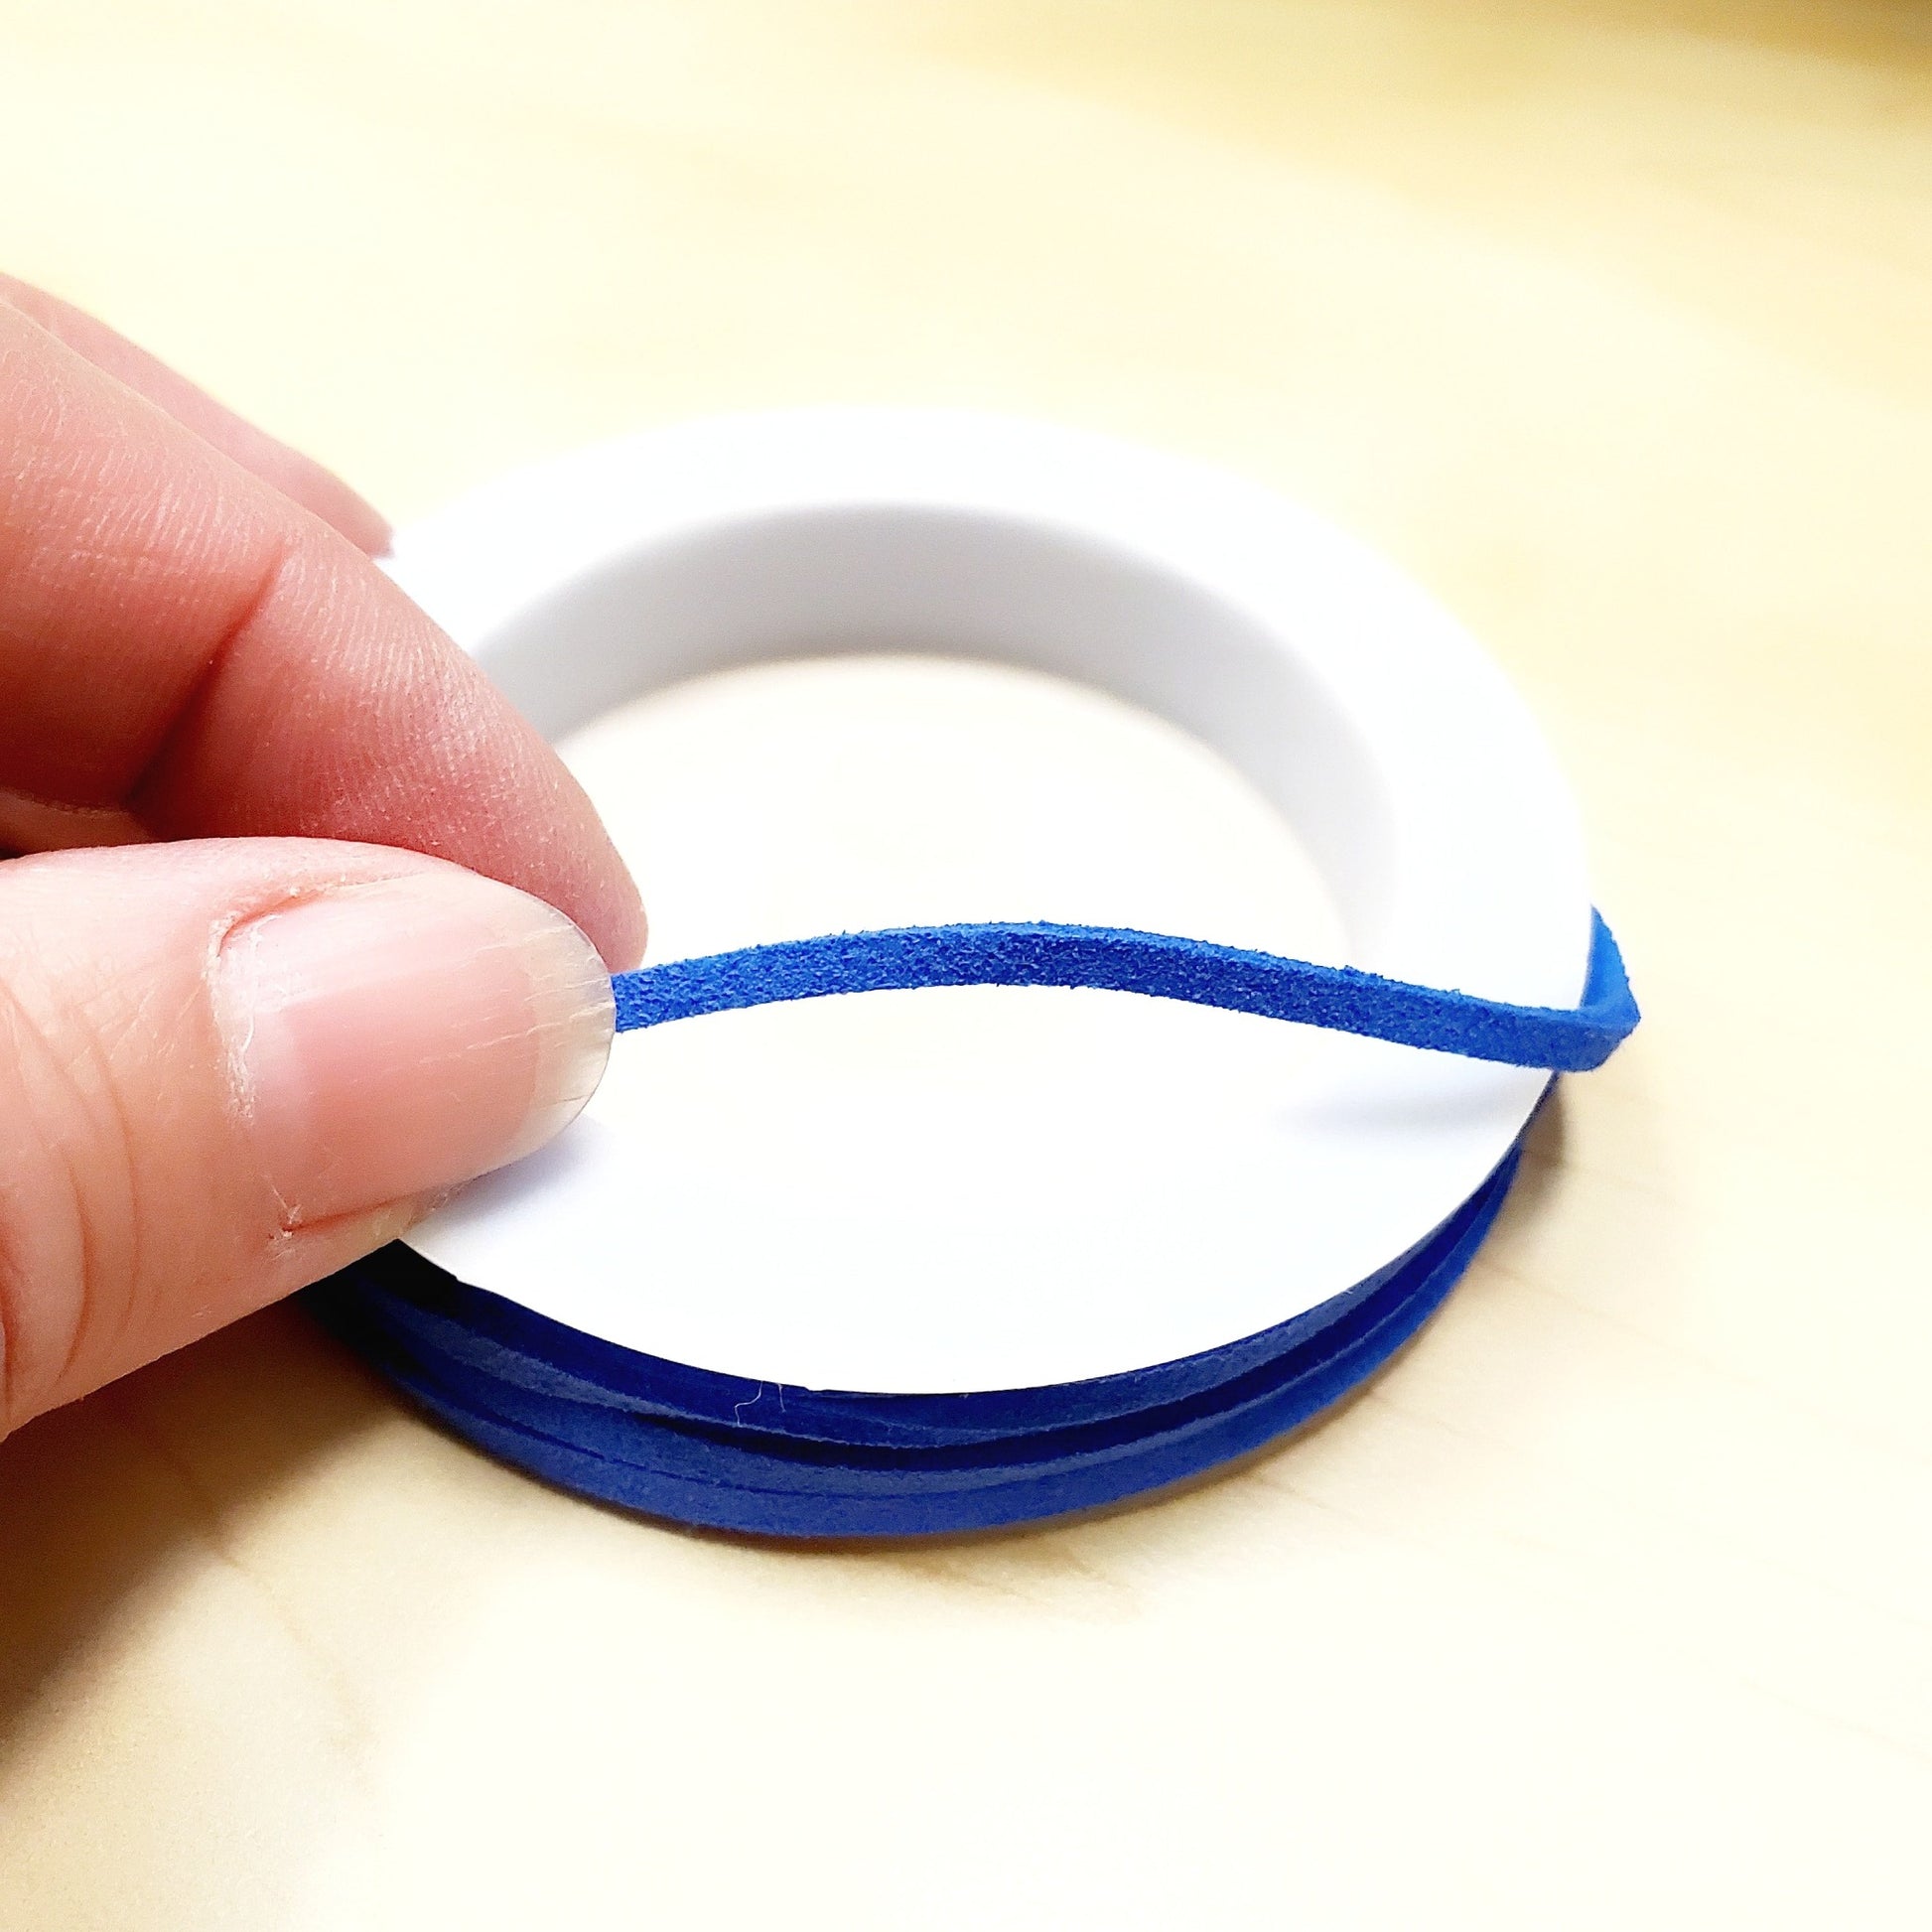 fingers holding a string of blue faux-suede coming from a white bobbin